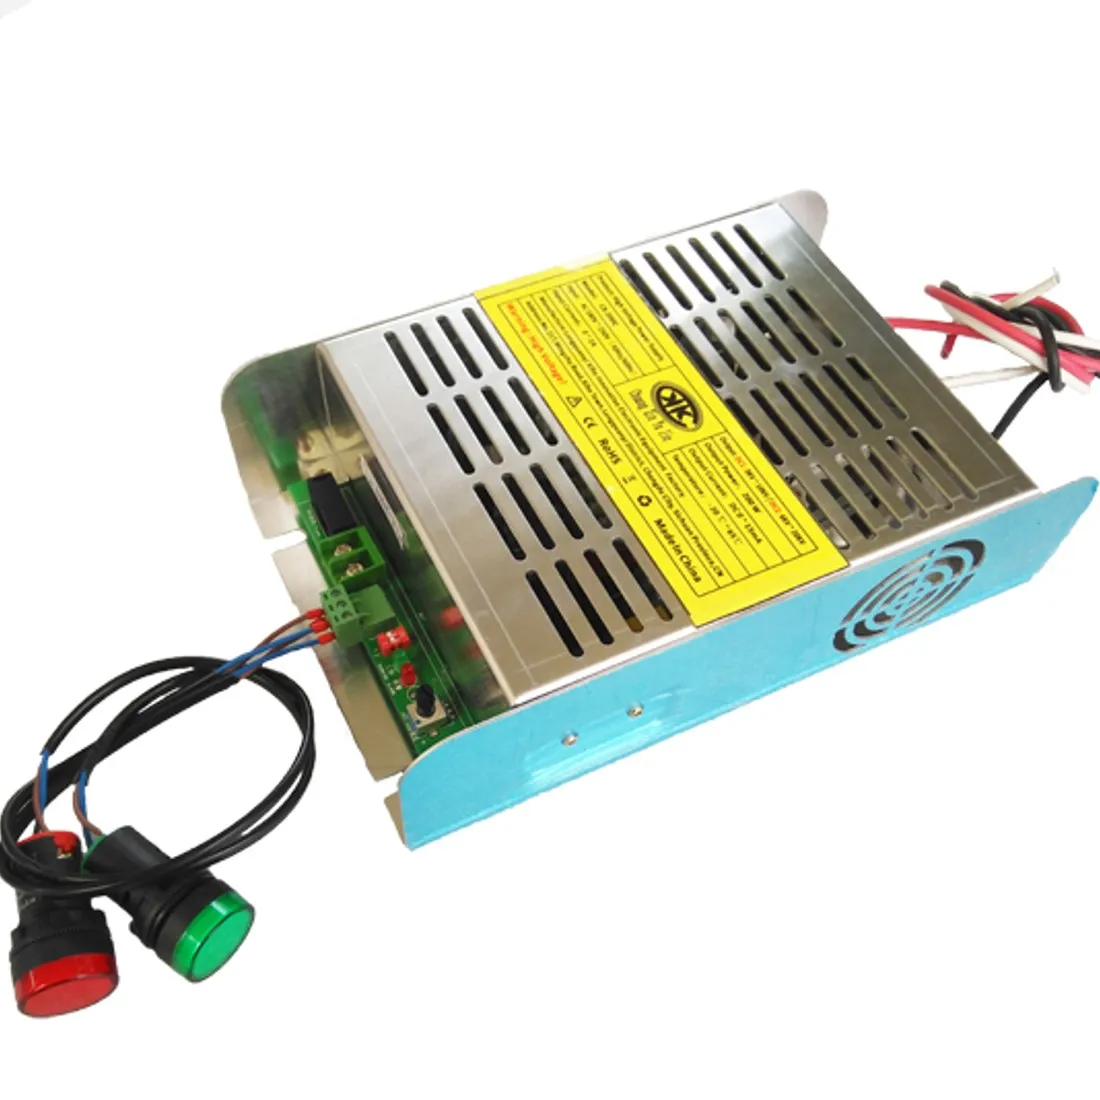 

High Voltage Power Supply with 20KV CX-200C Dual output Electrostatic Cleaner Air Purification